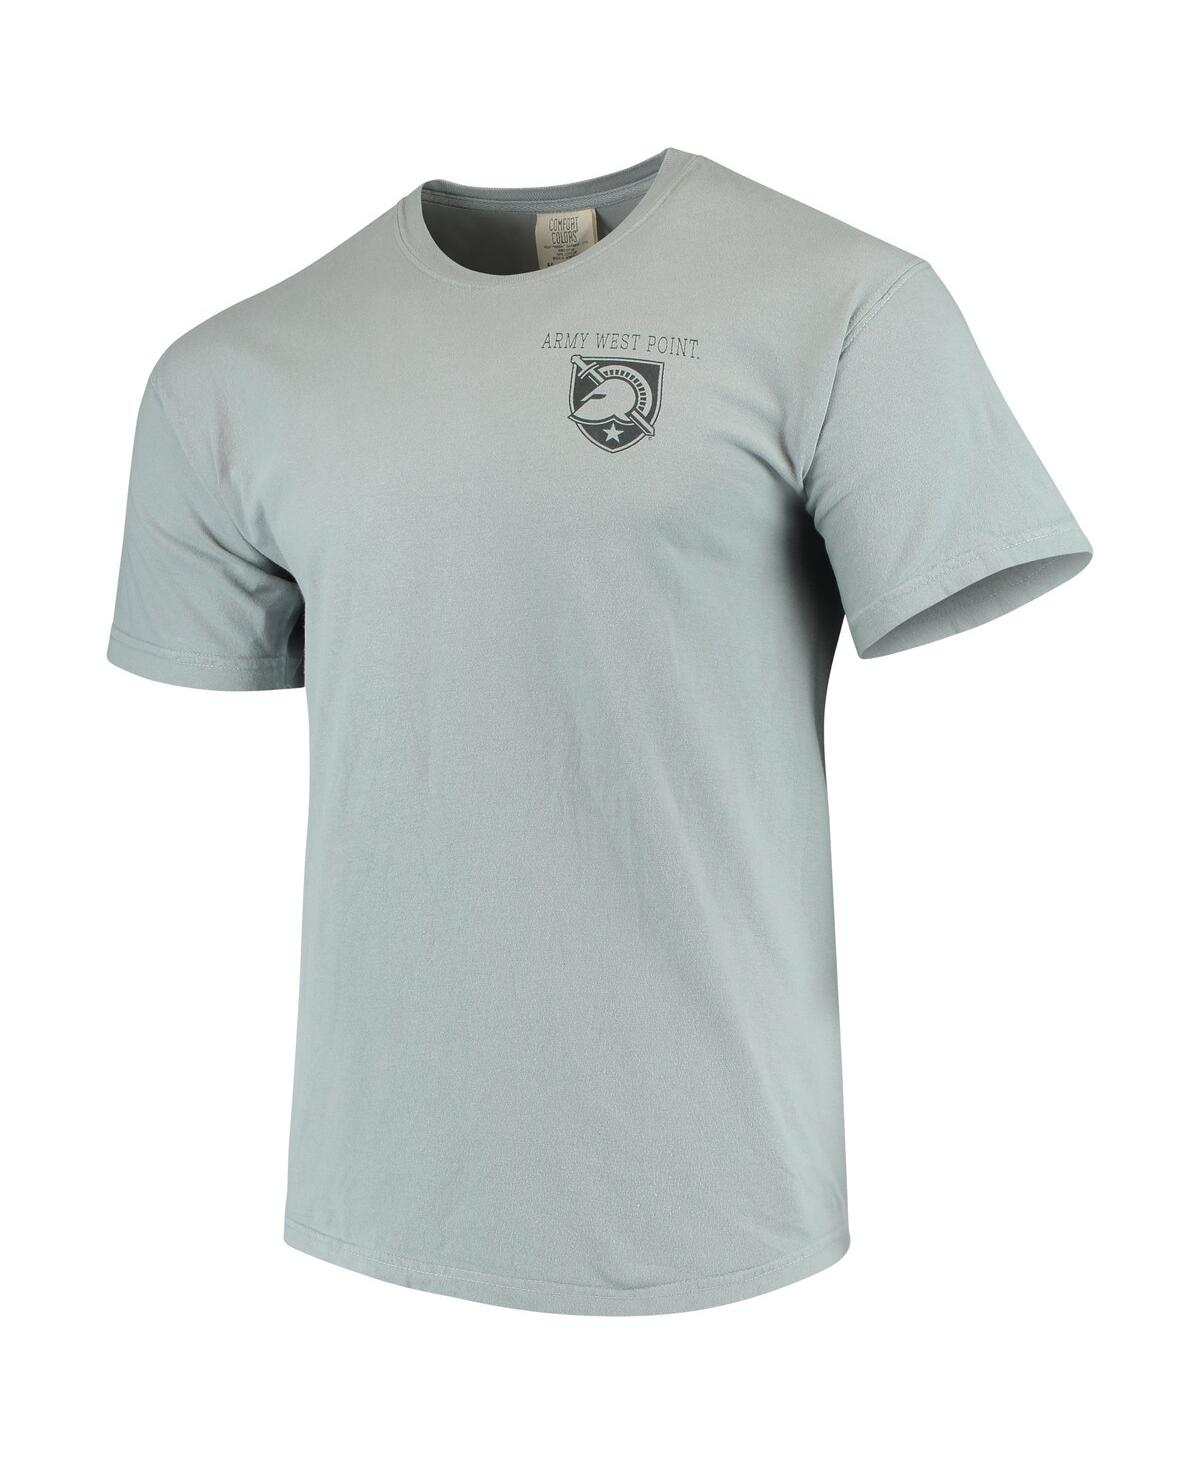 Shop Image One Men's Gray Army Black Knights Team Comfort Colors Campus Scenery T-shirt